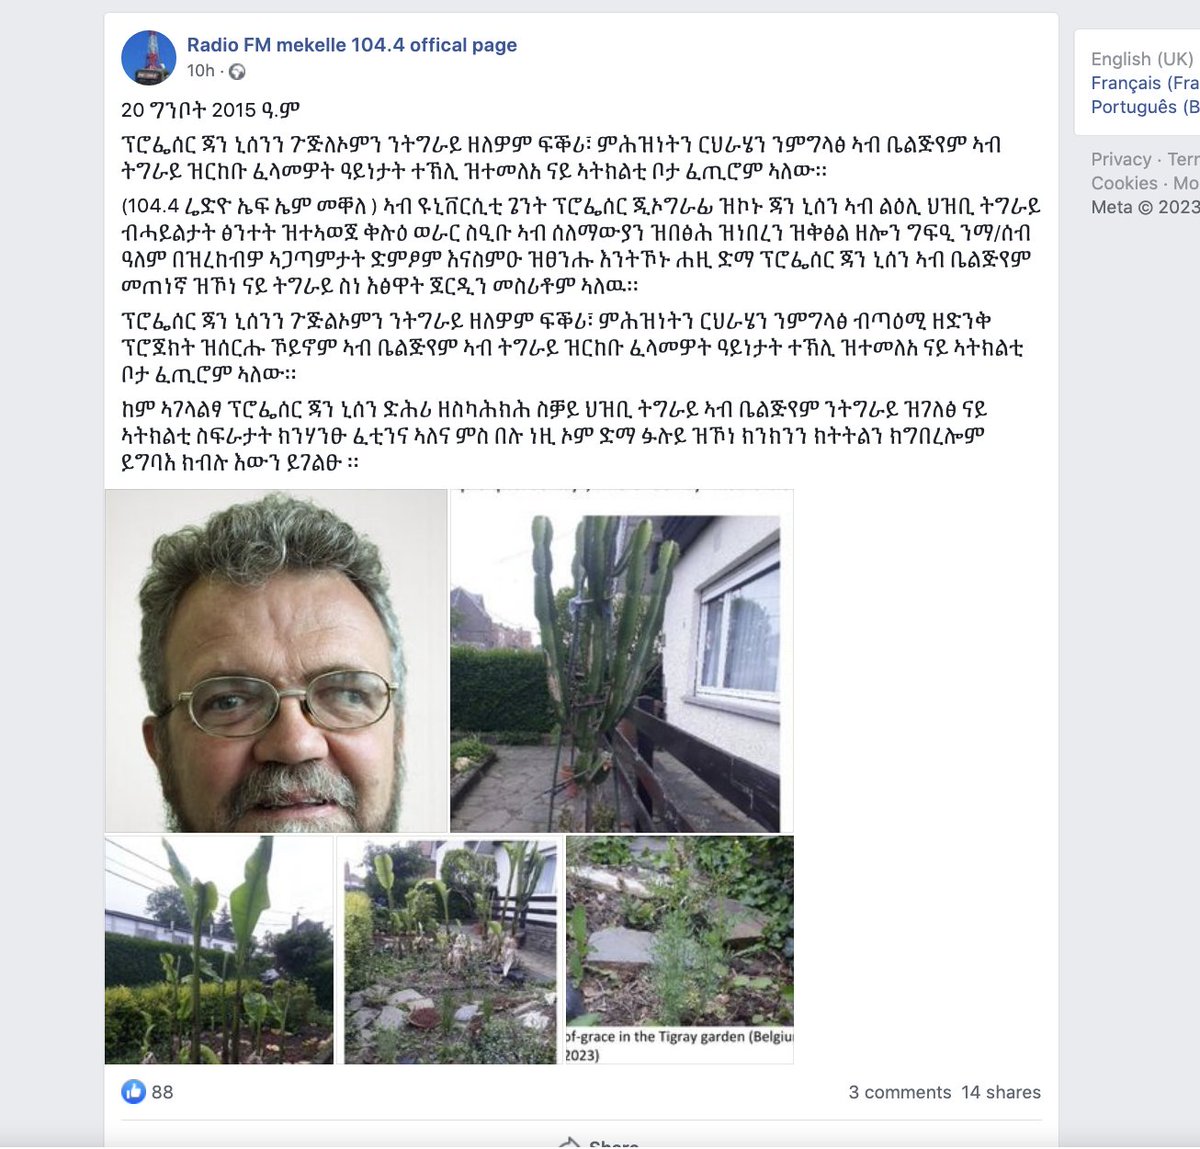 Tigray lauds Belgian academic Prof. Jan Nyssen for creating 'Tigray Garden' in his backyard full of plant species from Tigray. A report on Radio FM Mekelle